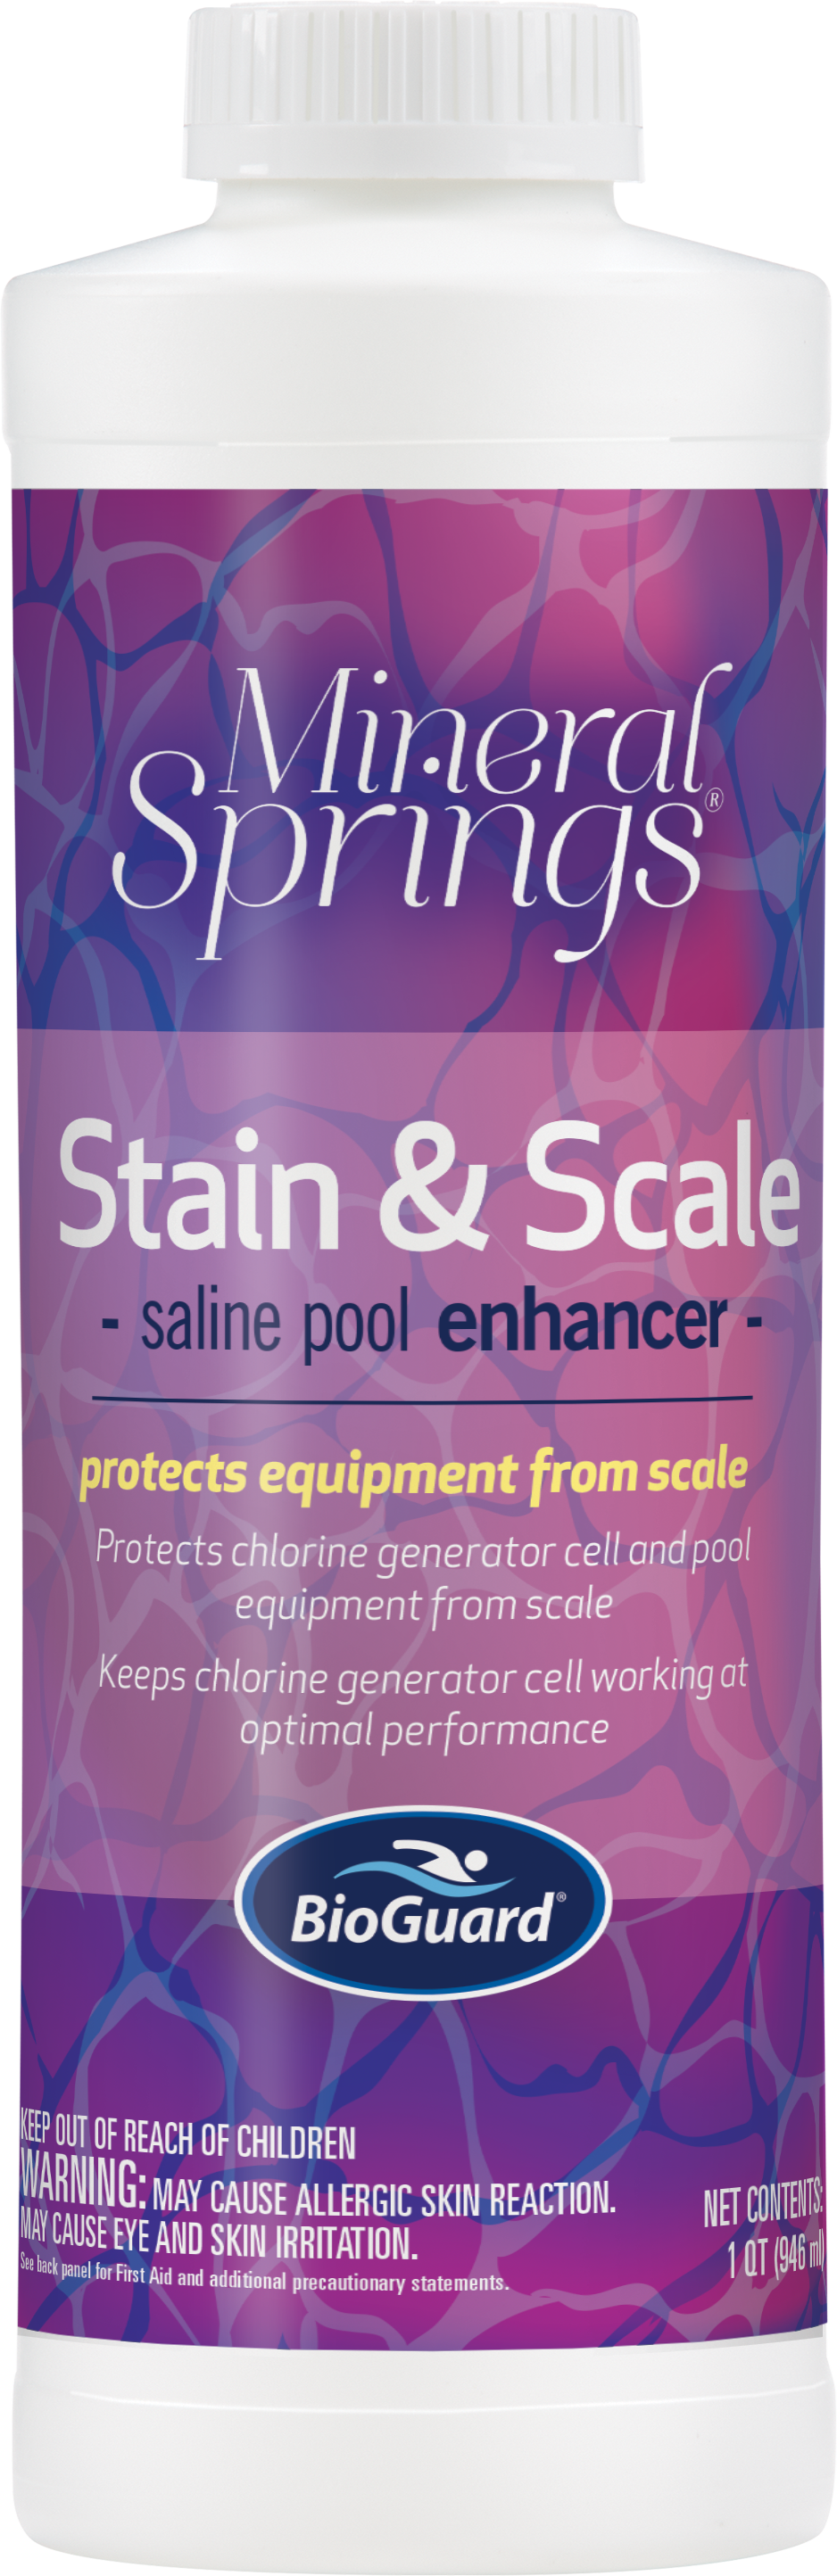 Mineral Springs Stain & Scale